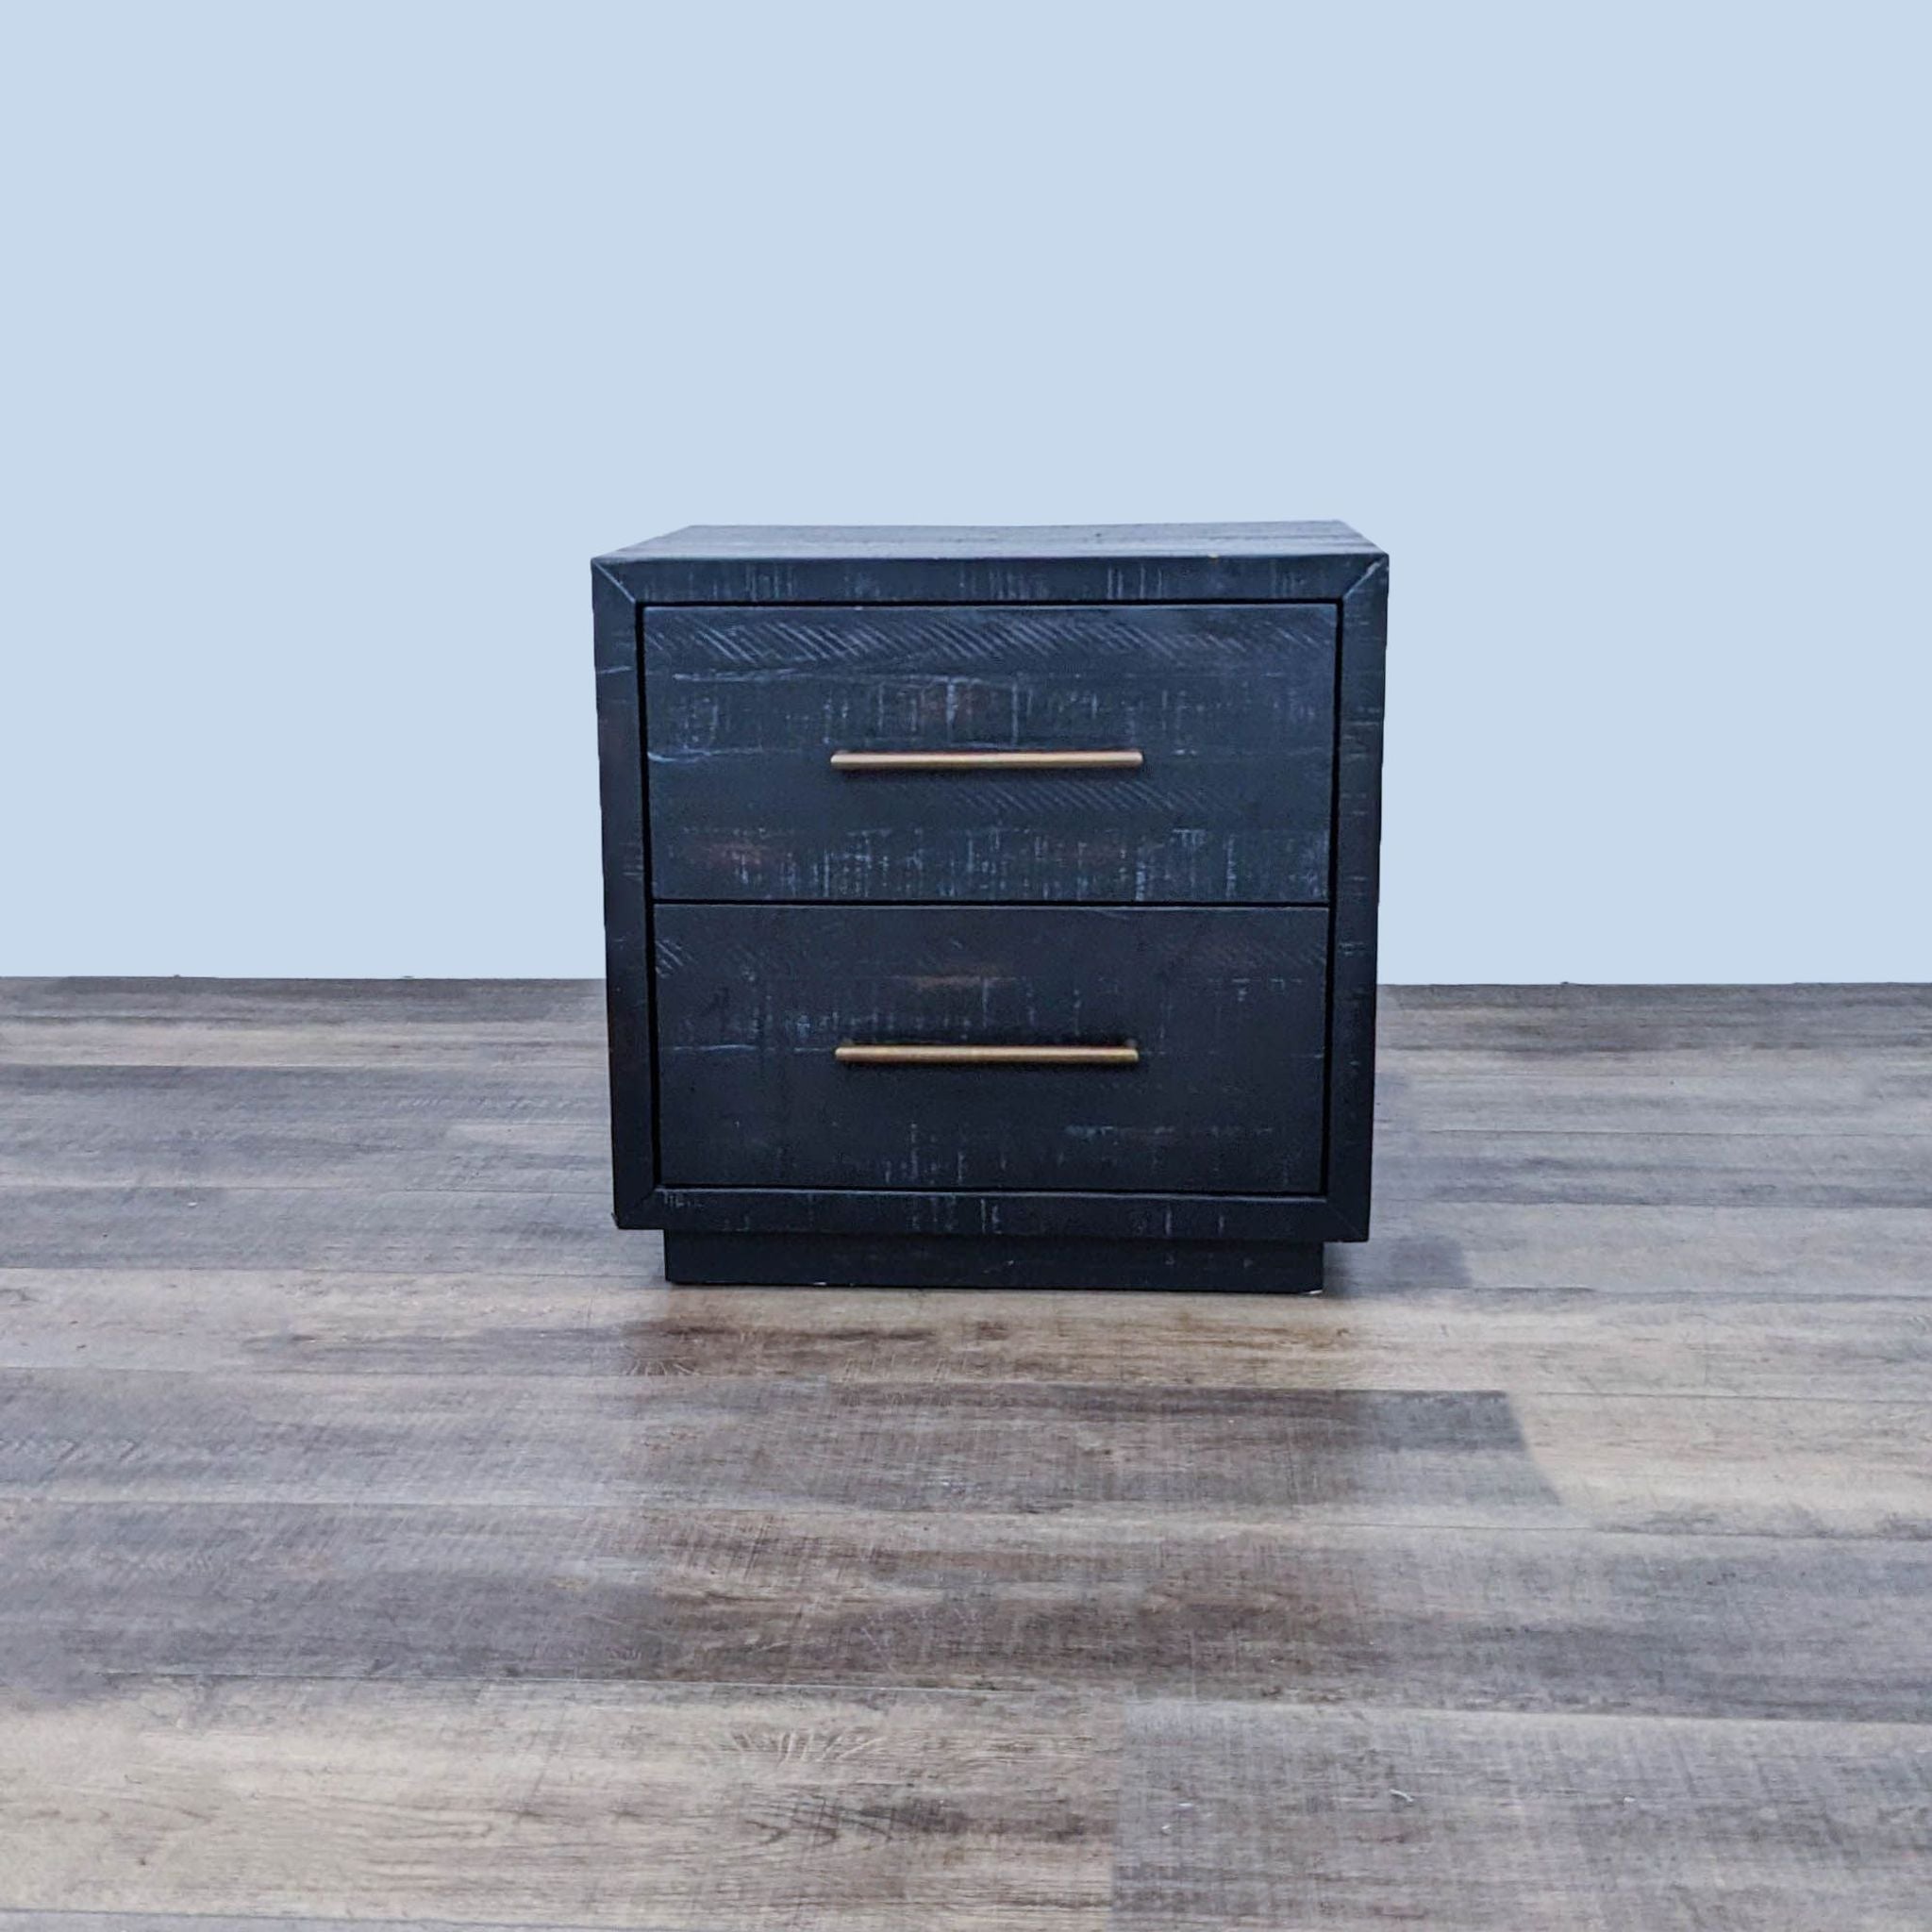 Four Hands brand acacia wood end table in a burnished black finish with two brass handles, on a wooden floor against a plain background.